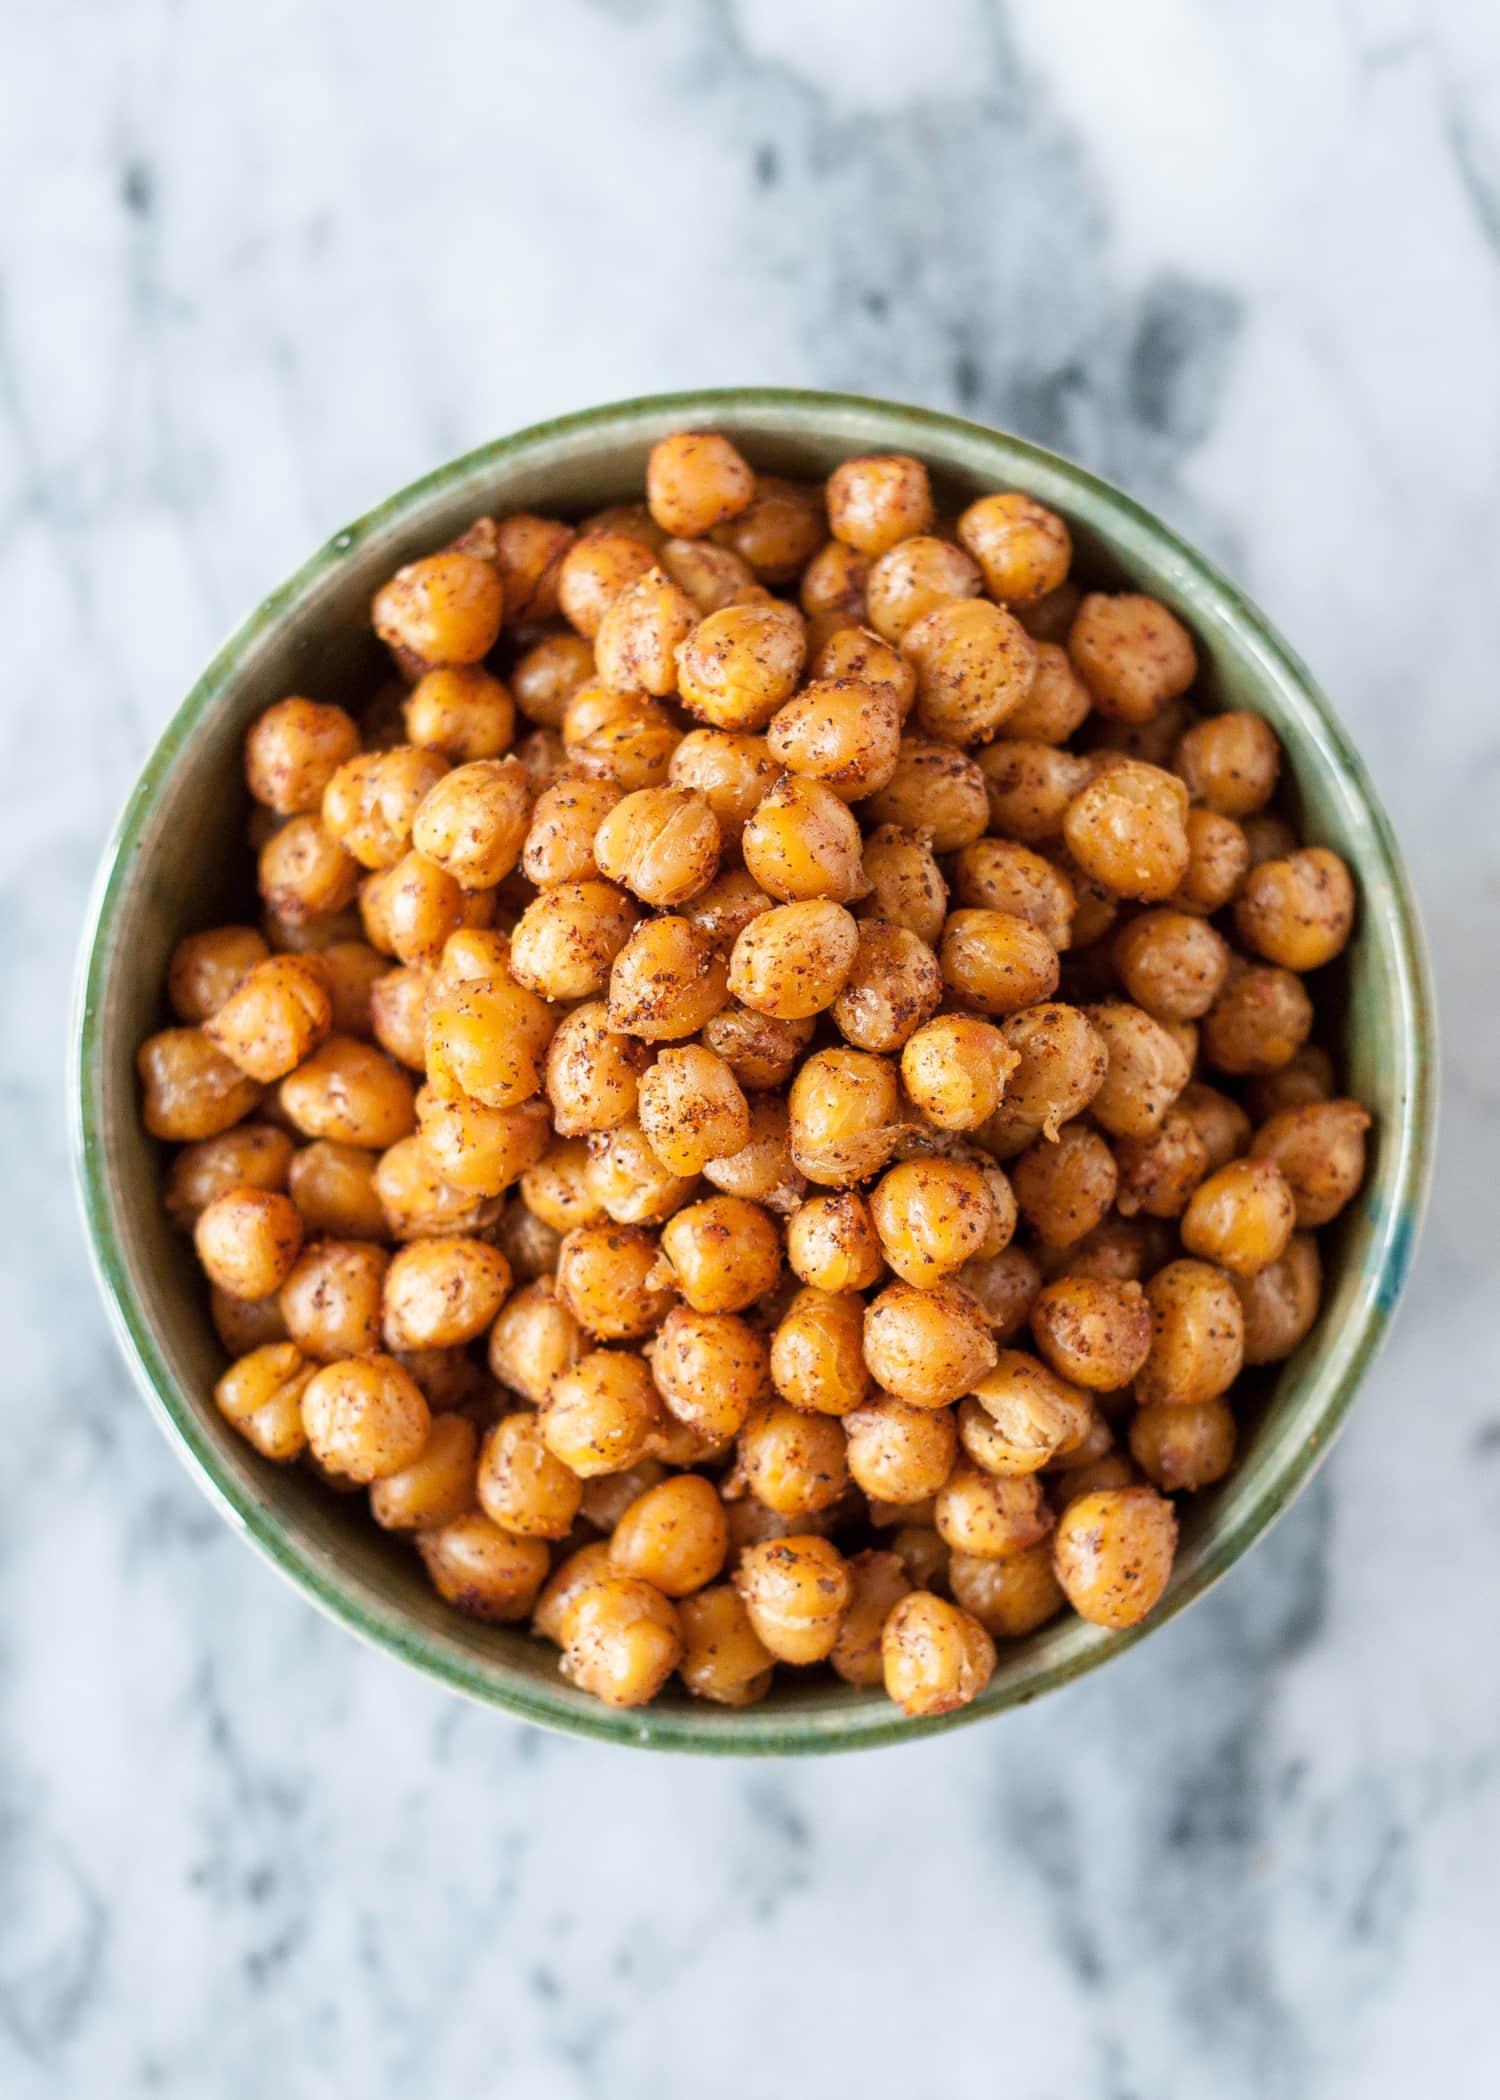 How To Make Crispy Roasted Chickpeas in the Oven | Kitchn